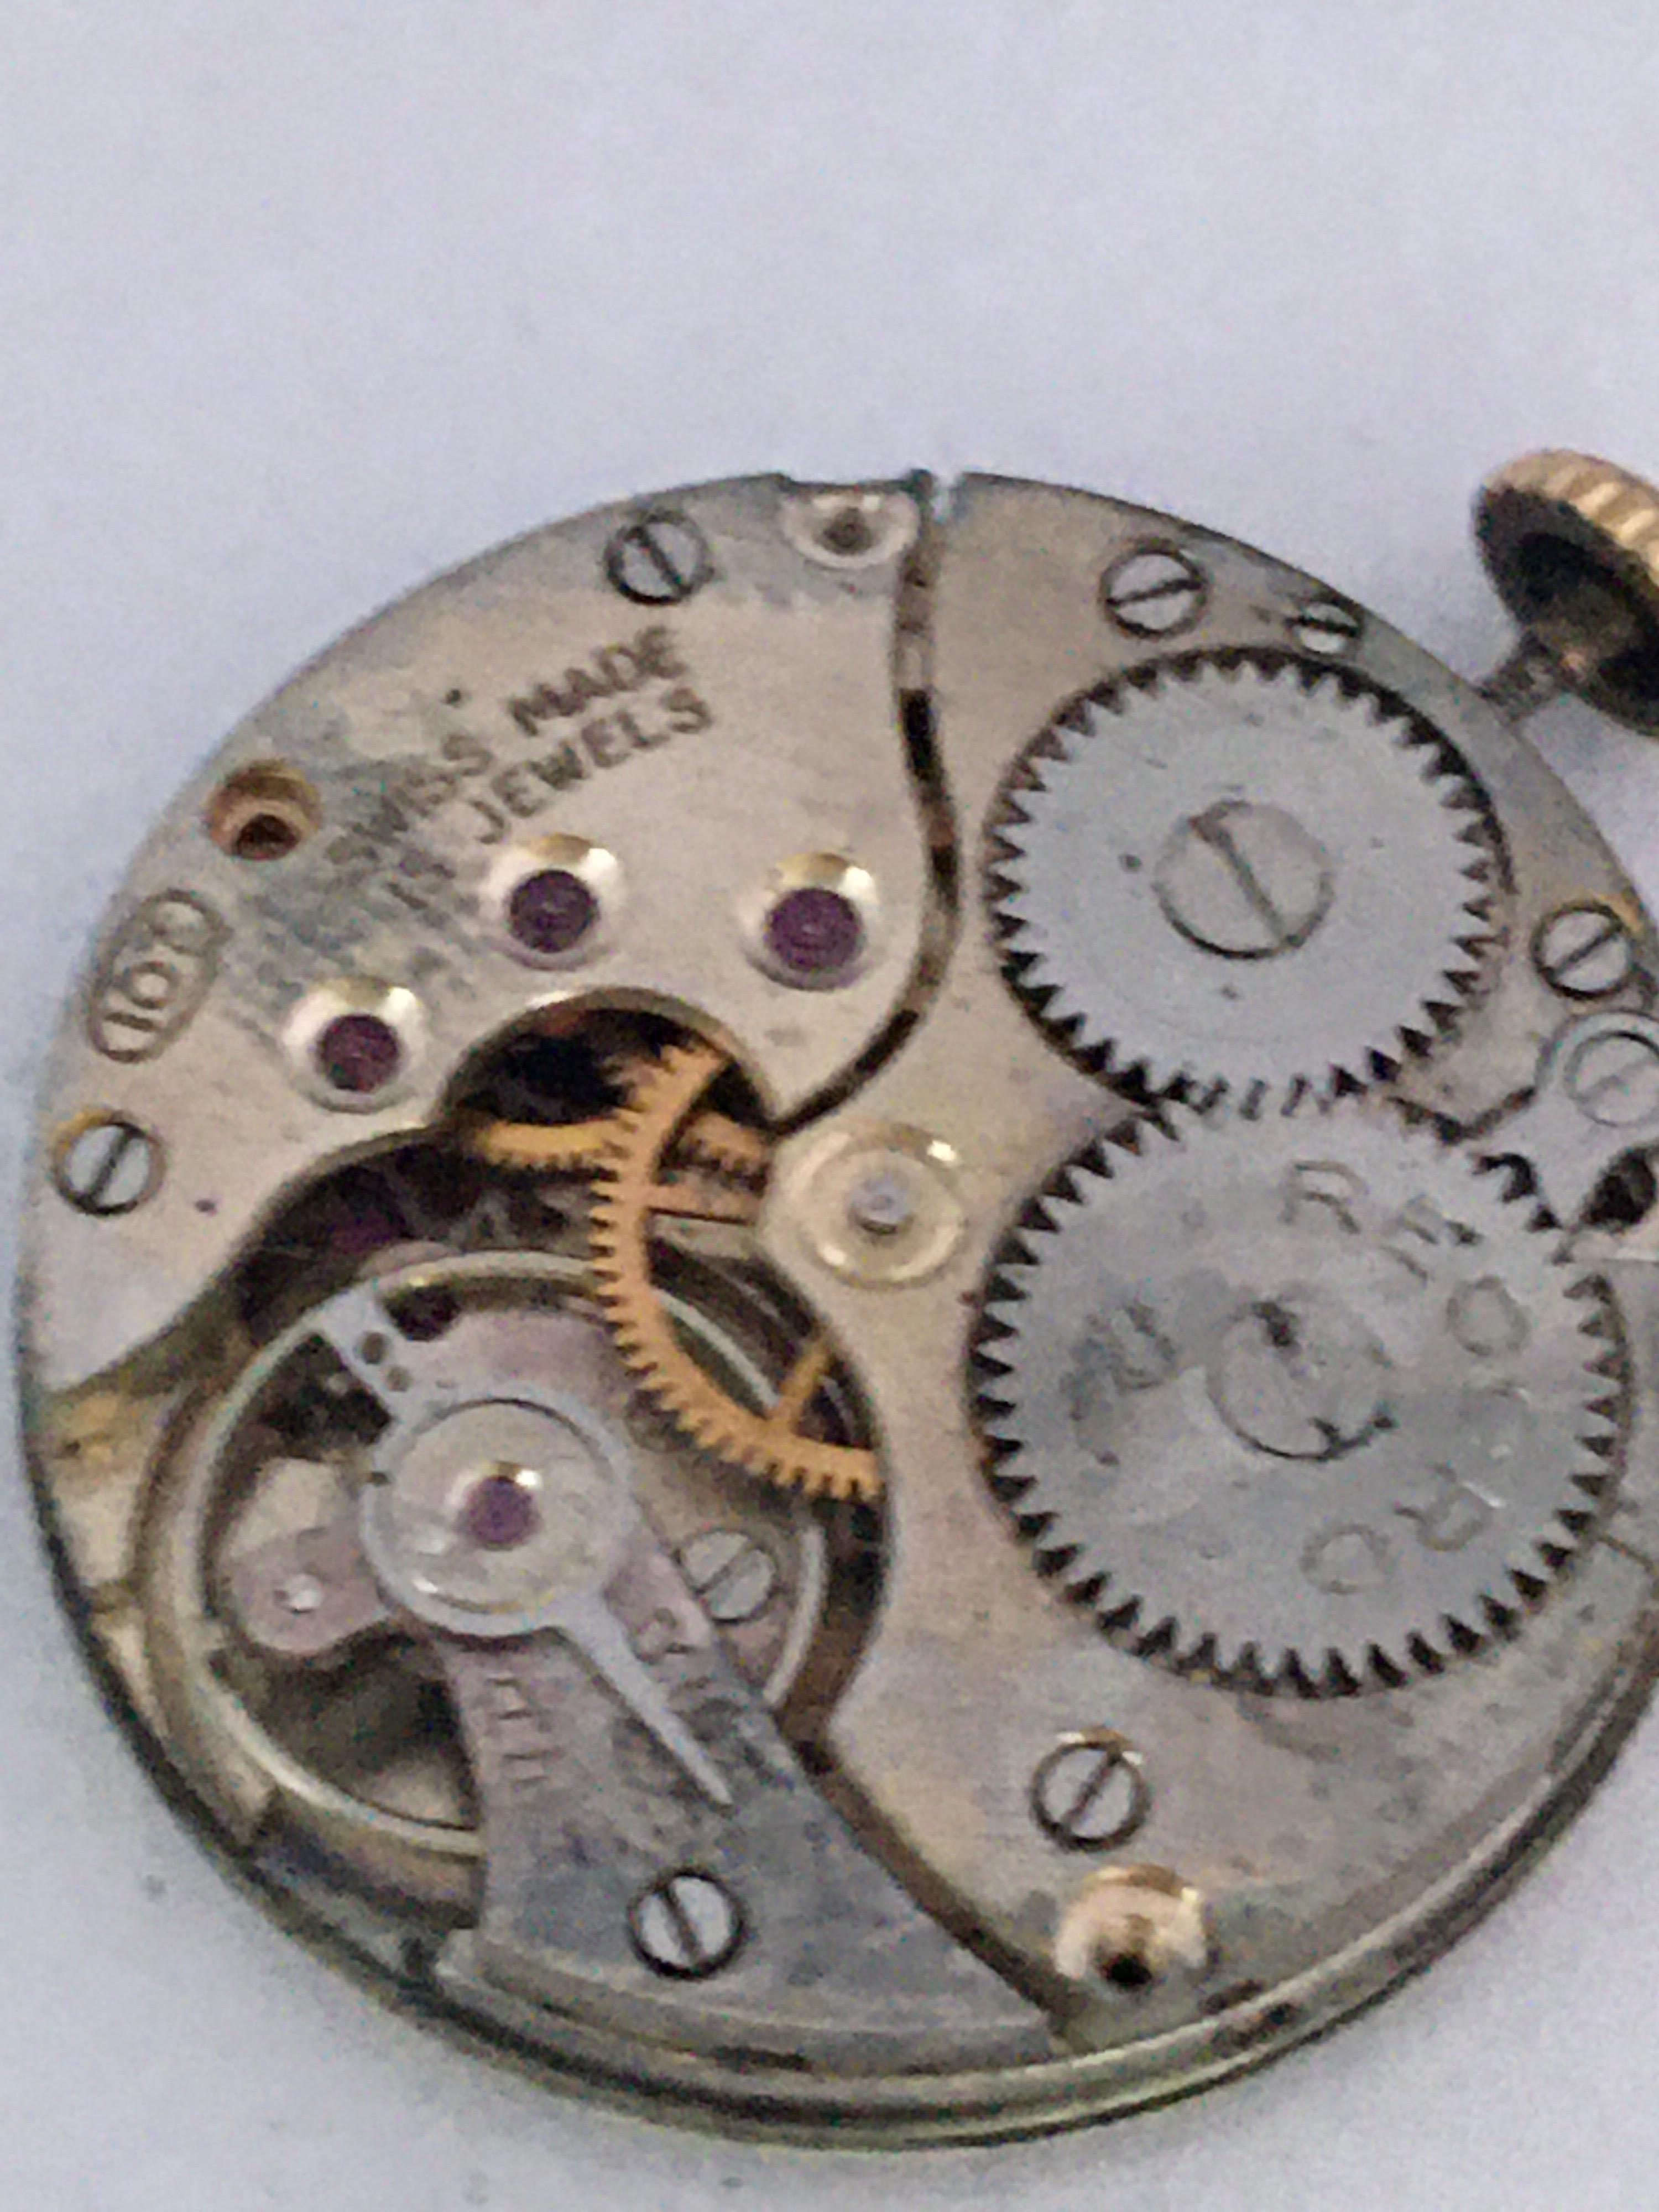 9 Karat Gold Vintage 1950s Récord Cushion Shaped Mechanical Watch For Sale 7